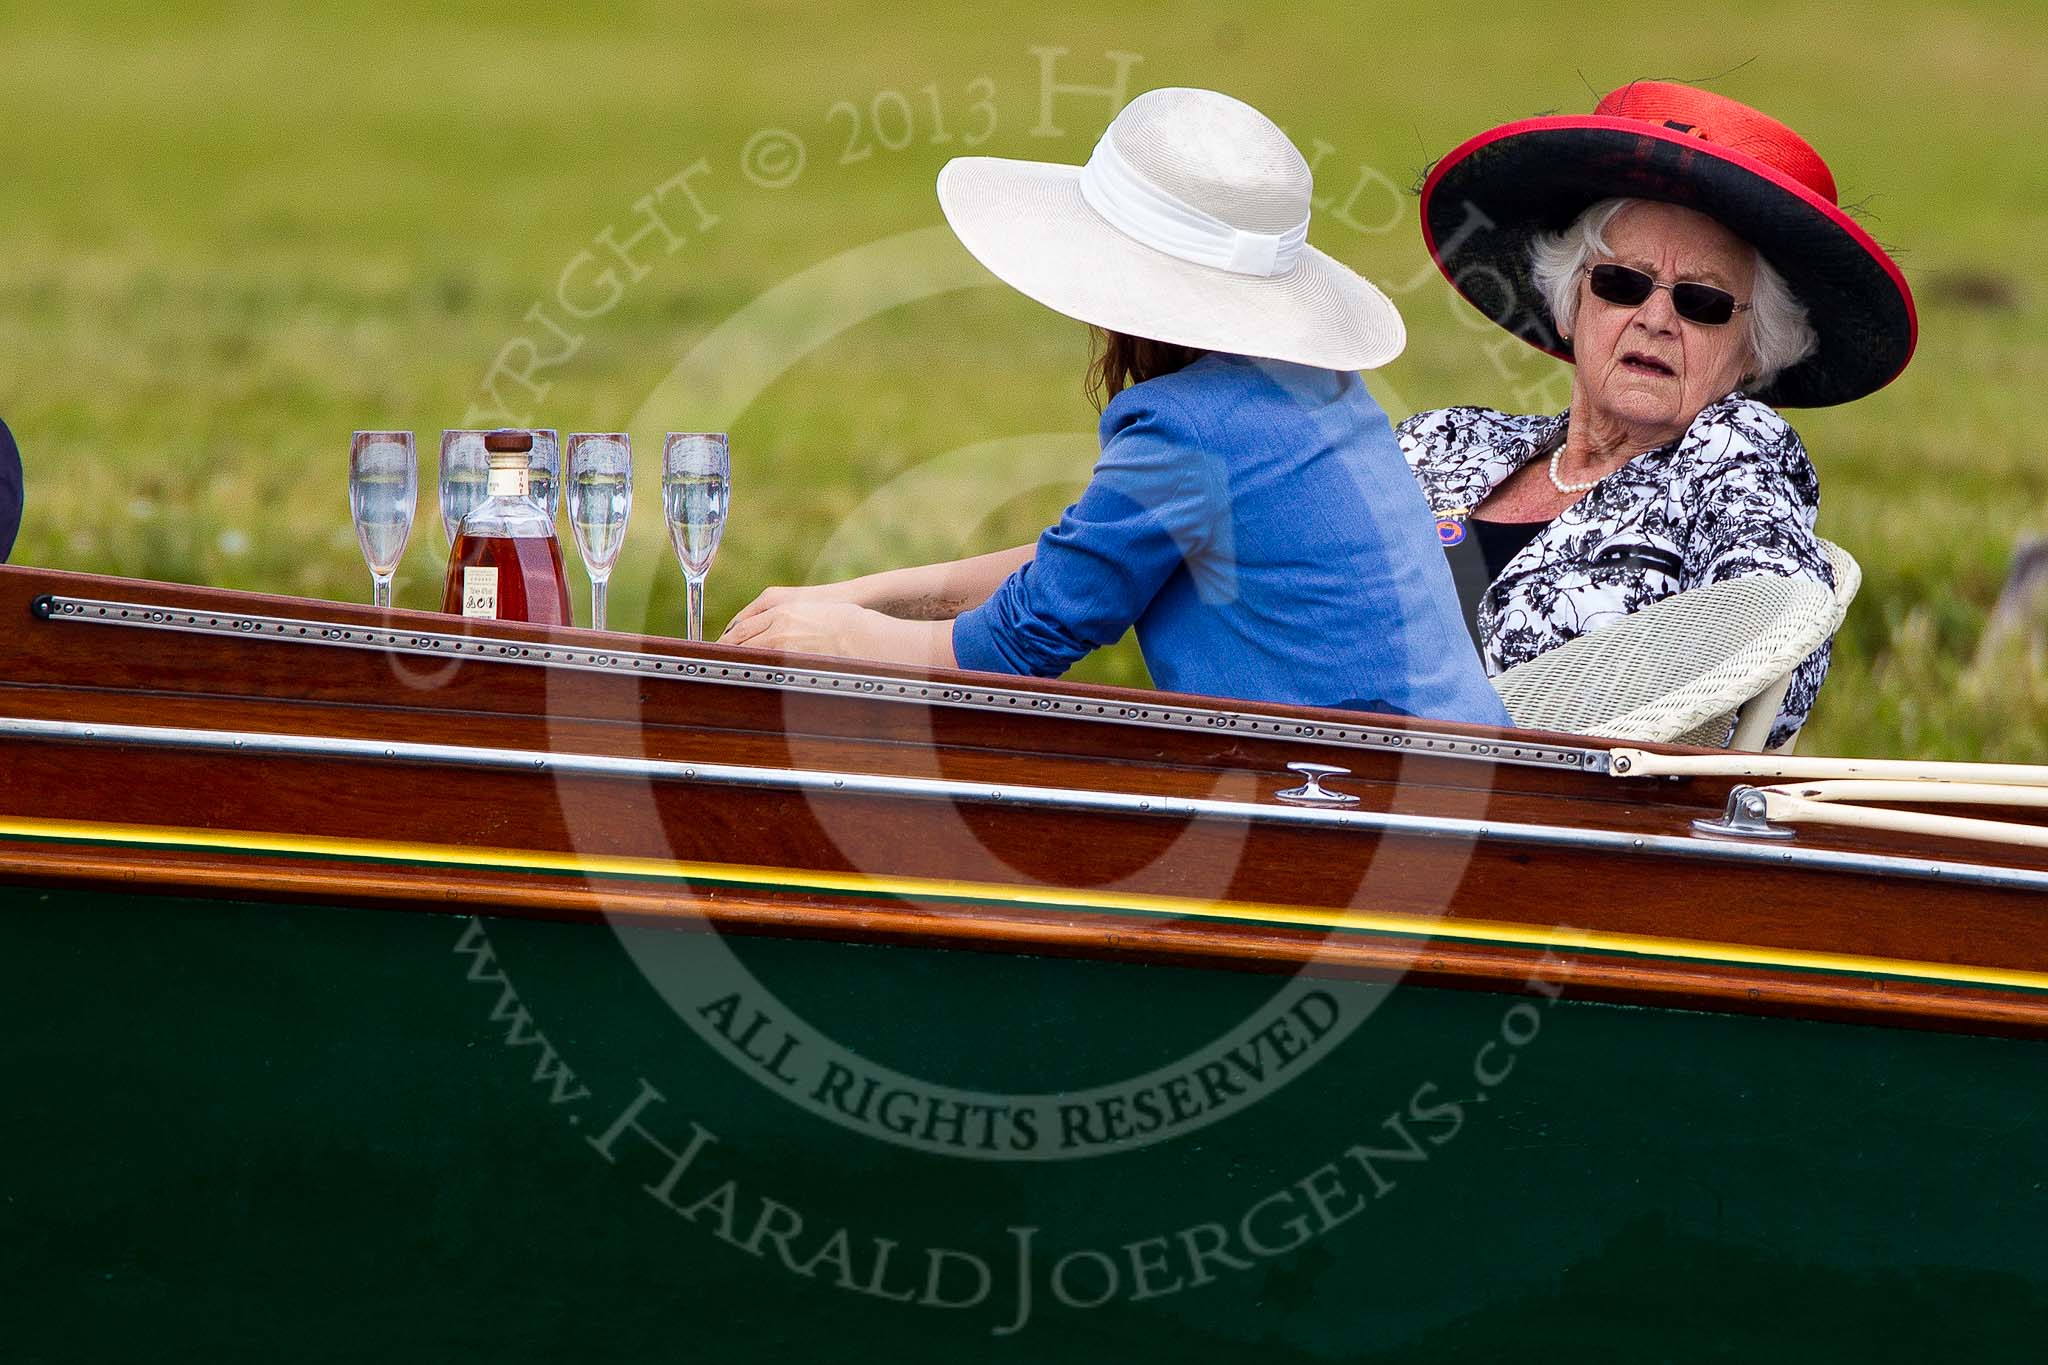 Henley Royal Regatta 2013, Saturday: Drinks (Hine Cognac), hats, and Henley Royal Regatta outfits on board the launch 'Fish Rising'. Image #188, 06 July 2013 11:13 River Thames, Henley on Thames, UK